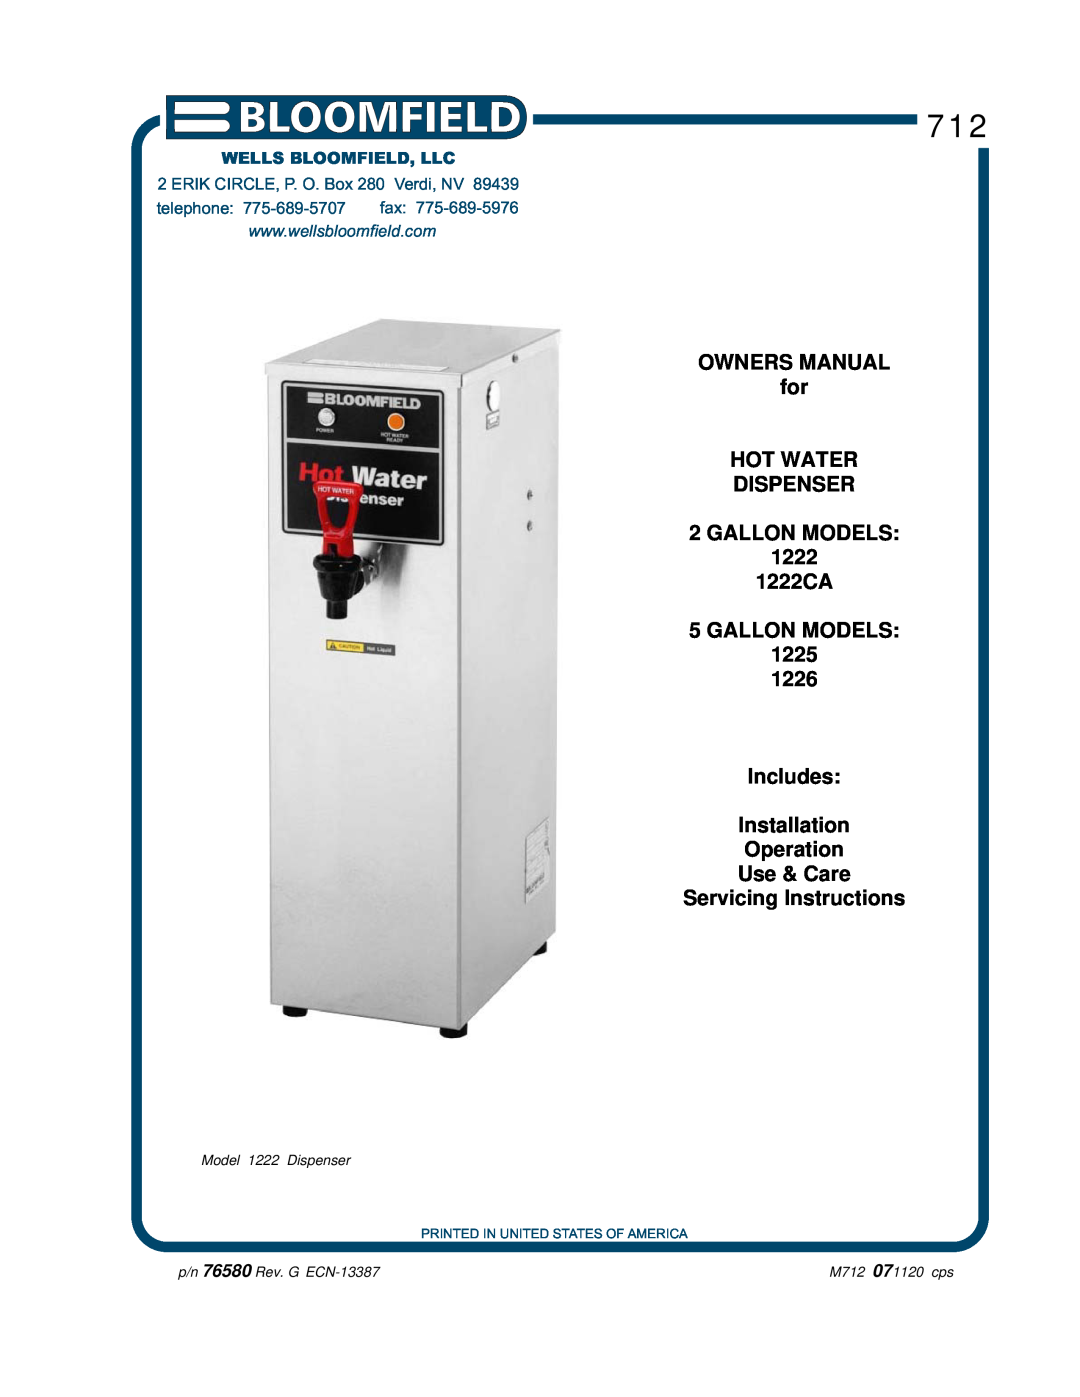 Wells 1222 1222CA owner manual GALLON MODELS 1225 1226 Includes Installation Operation Use & Care, Servicing Instructions 